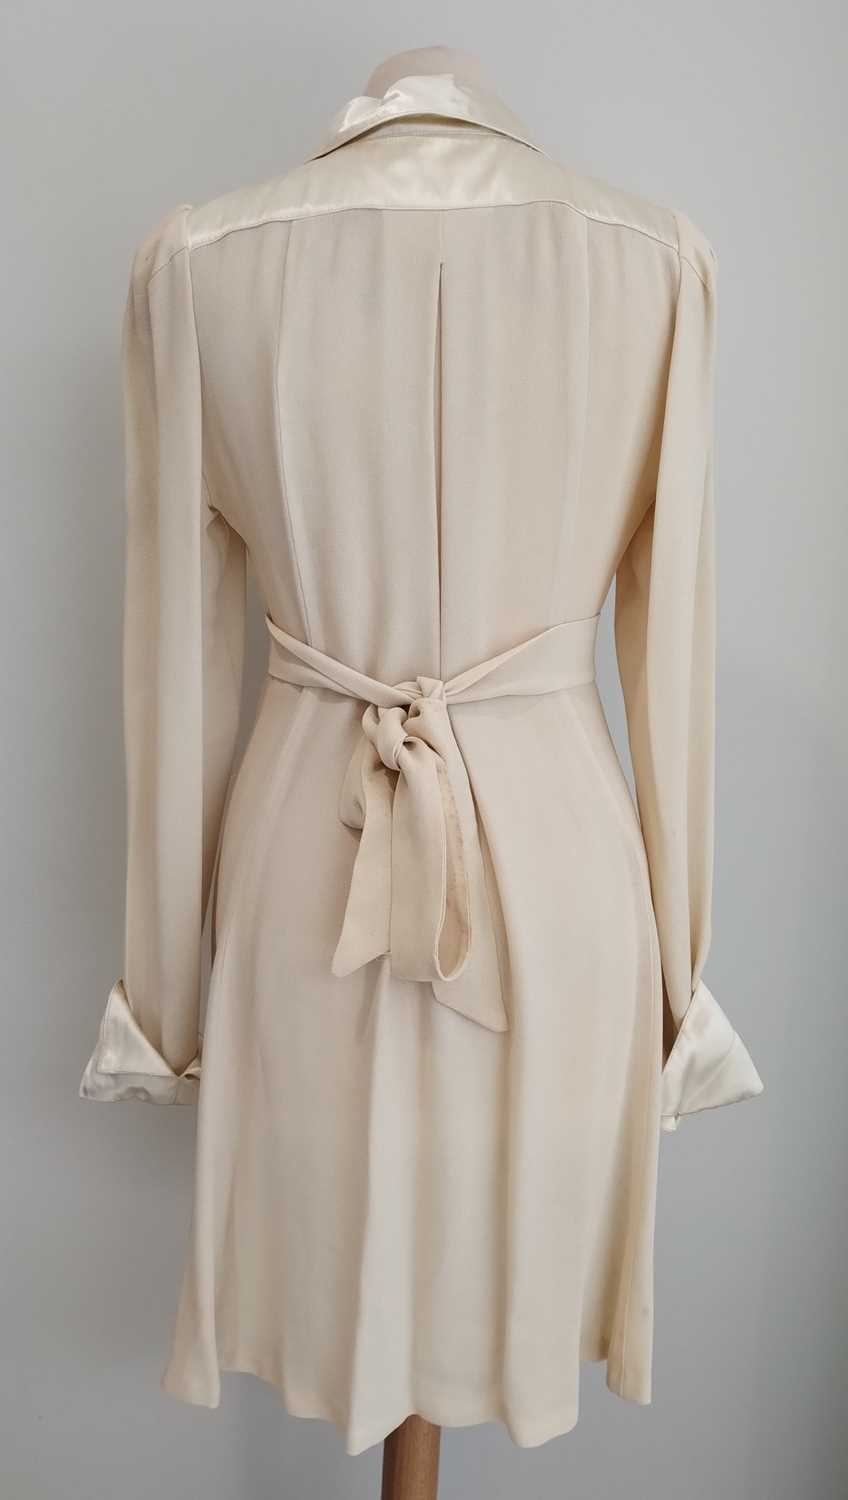 Ossie Clark for Radley Cream Moss Crepe Mini Dress, with long sleeves, mounted with cream satin type - Image 4 of 23